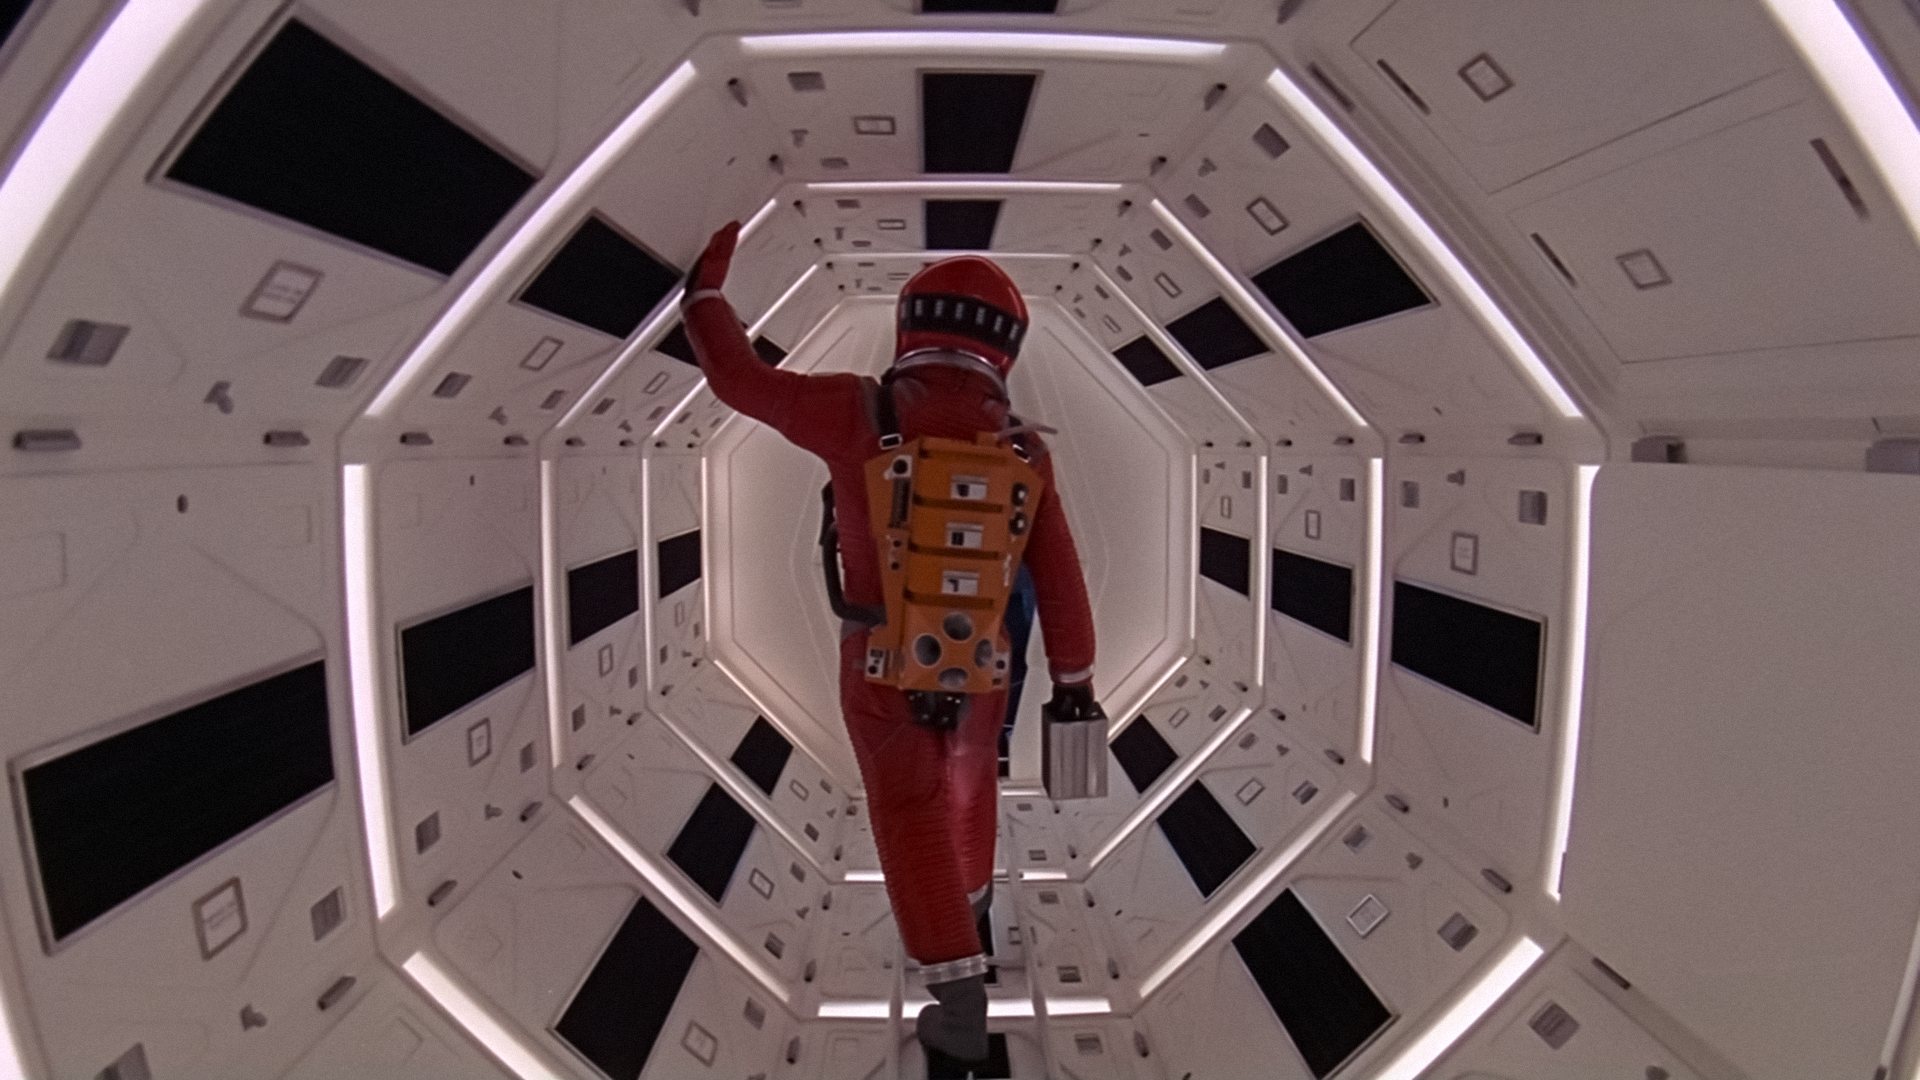 2001: A Space Odyssey Wallpaper Free 2001: A Space Odyssey